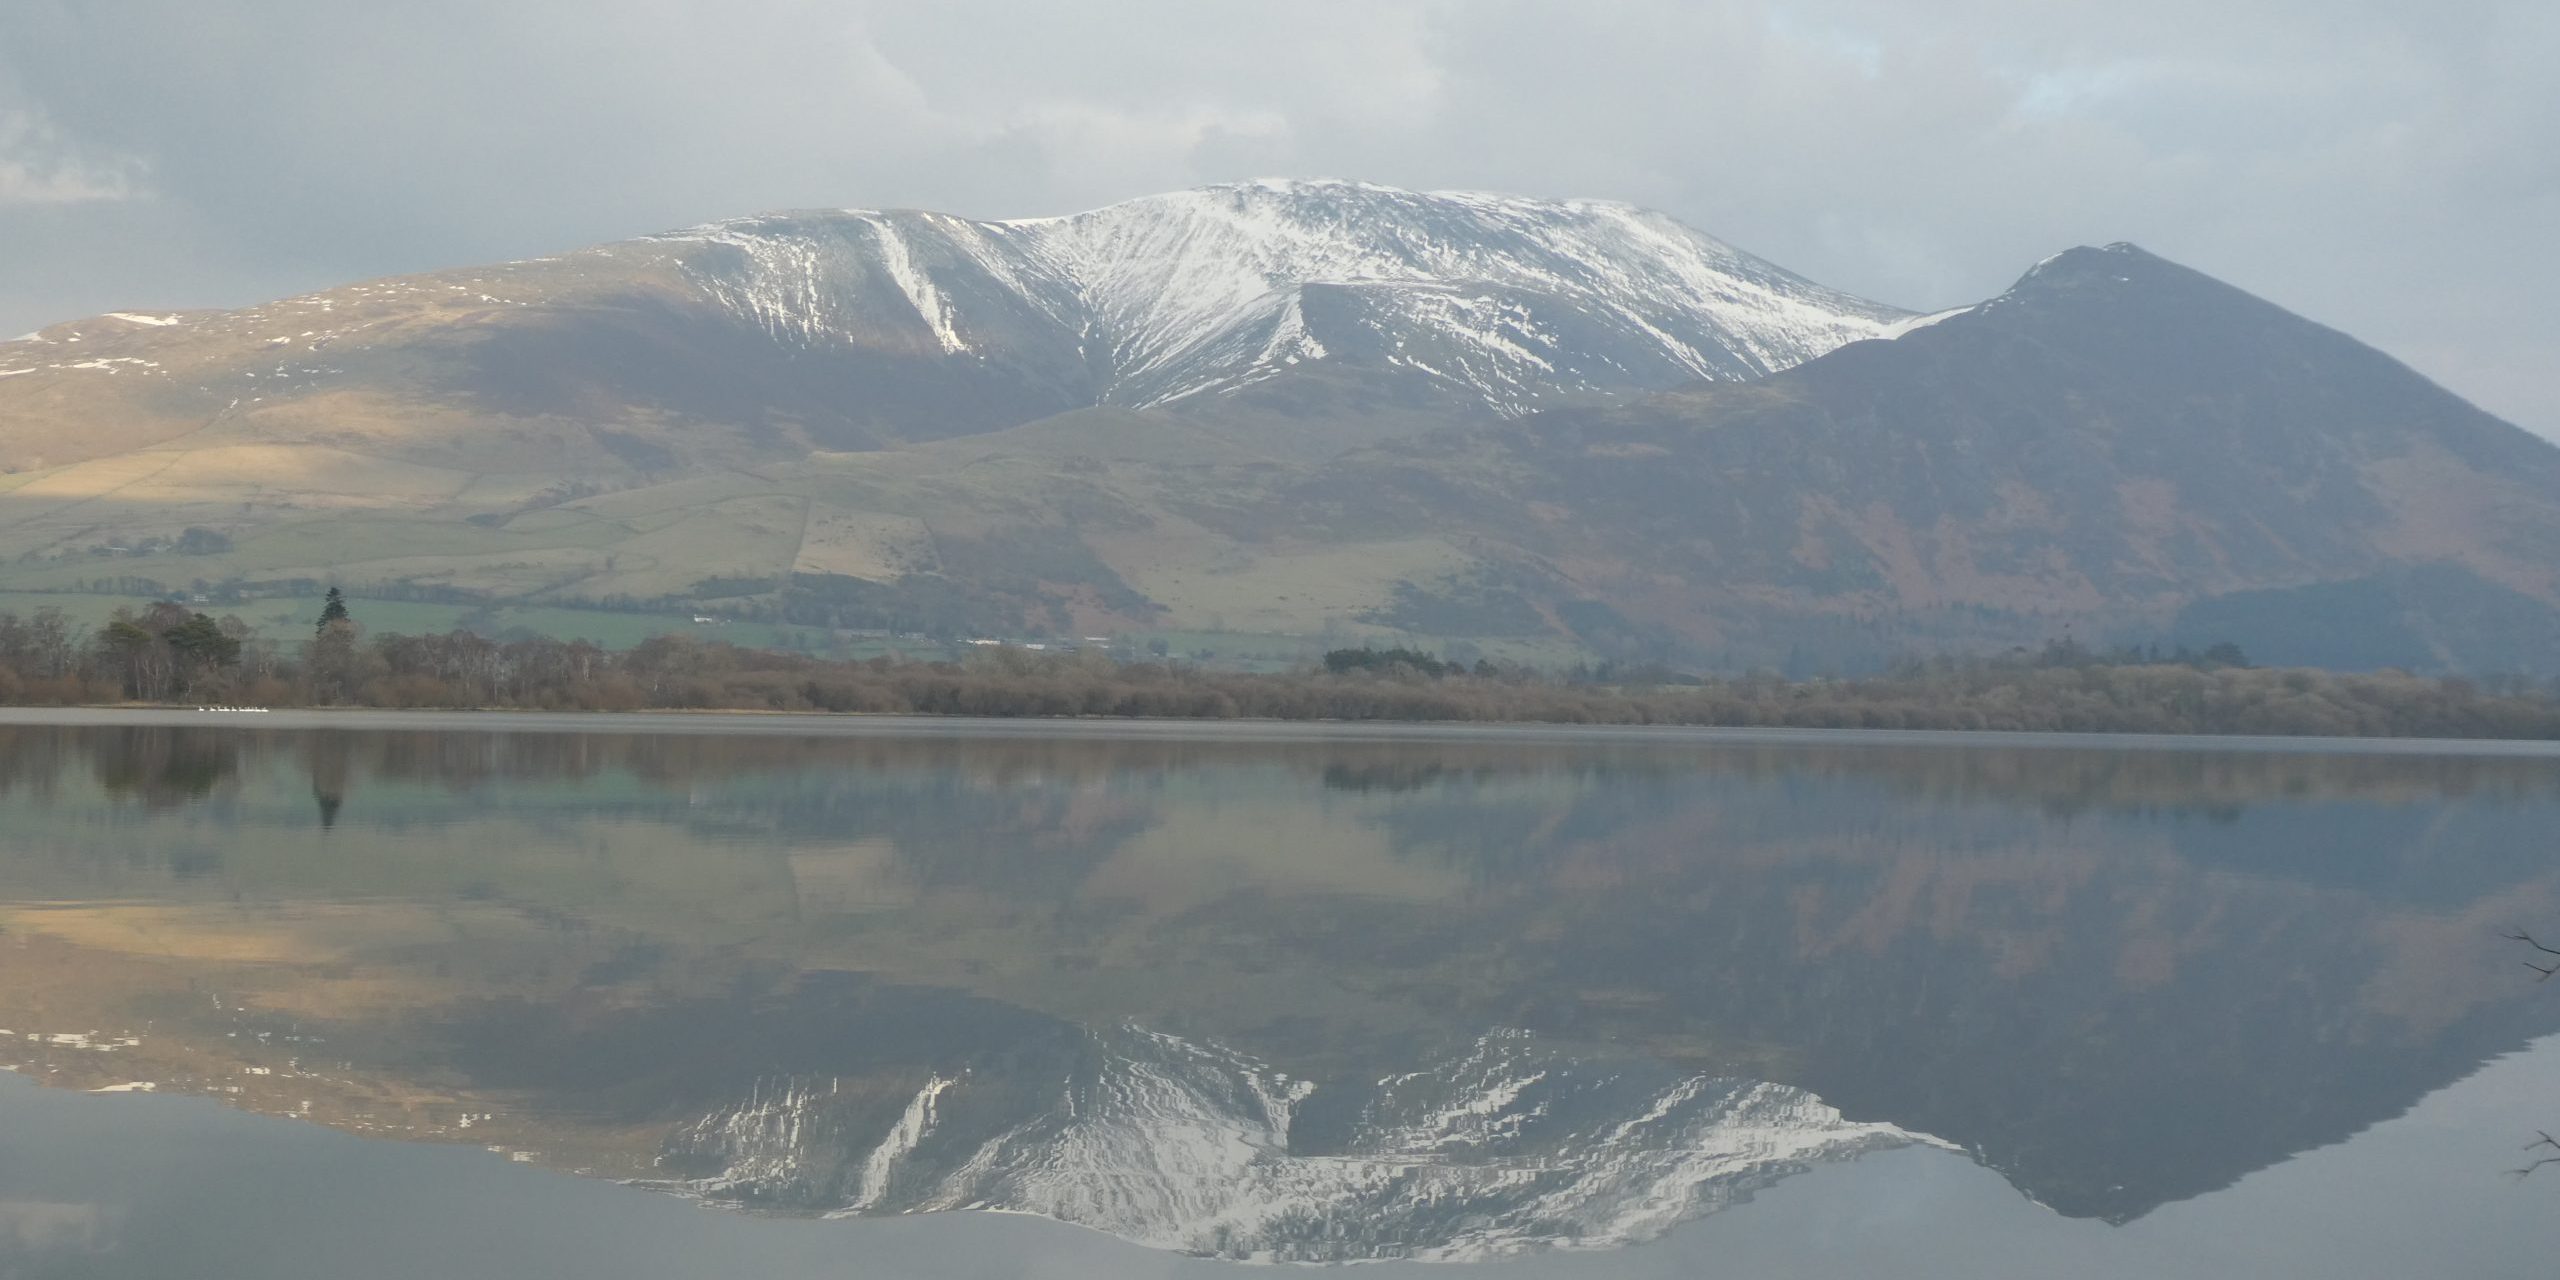 Nearby Bassenthwaite Lake and Skiddaw, in early Spring